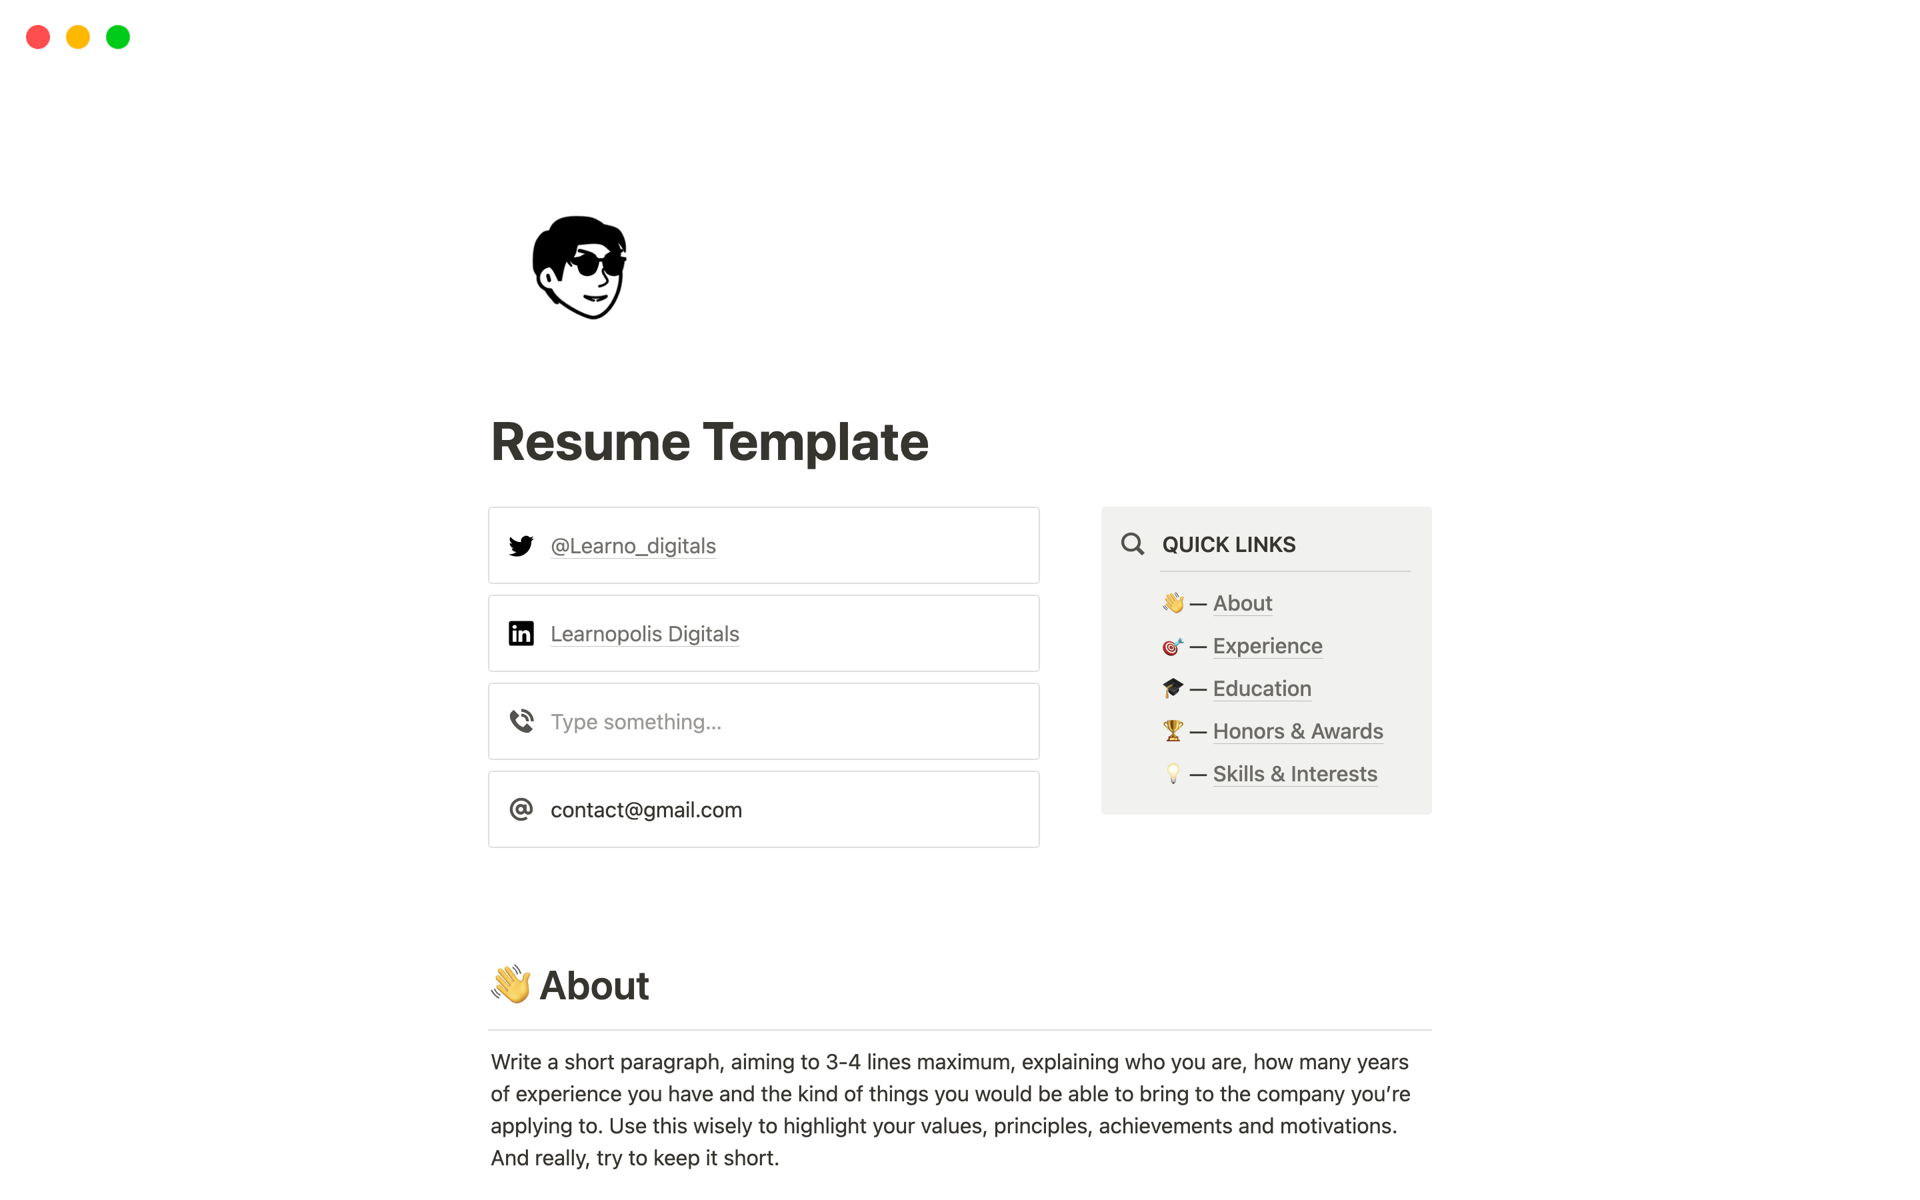 Craft a standout CV with ease using our sleek template